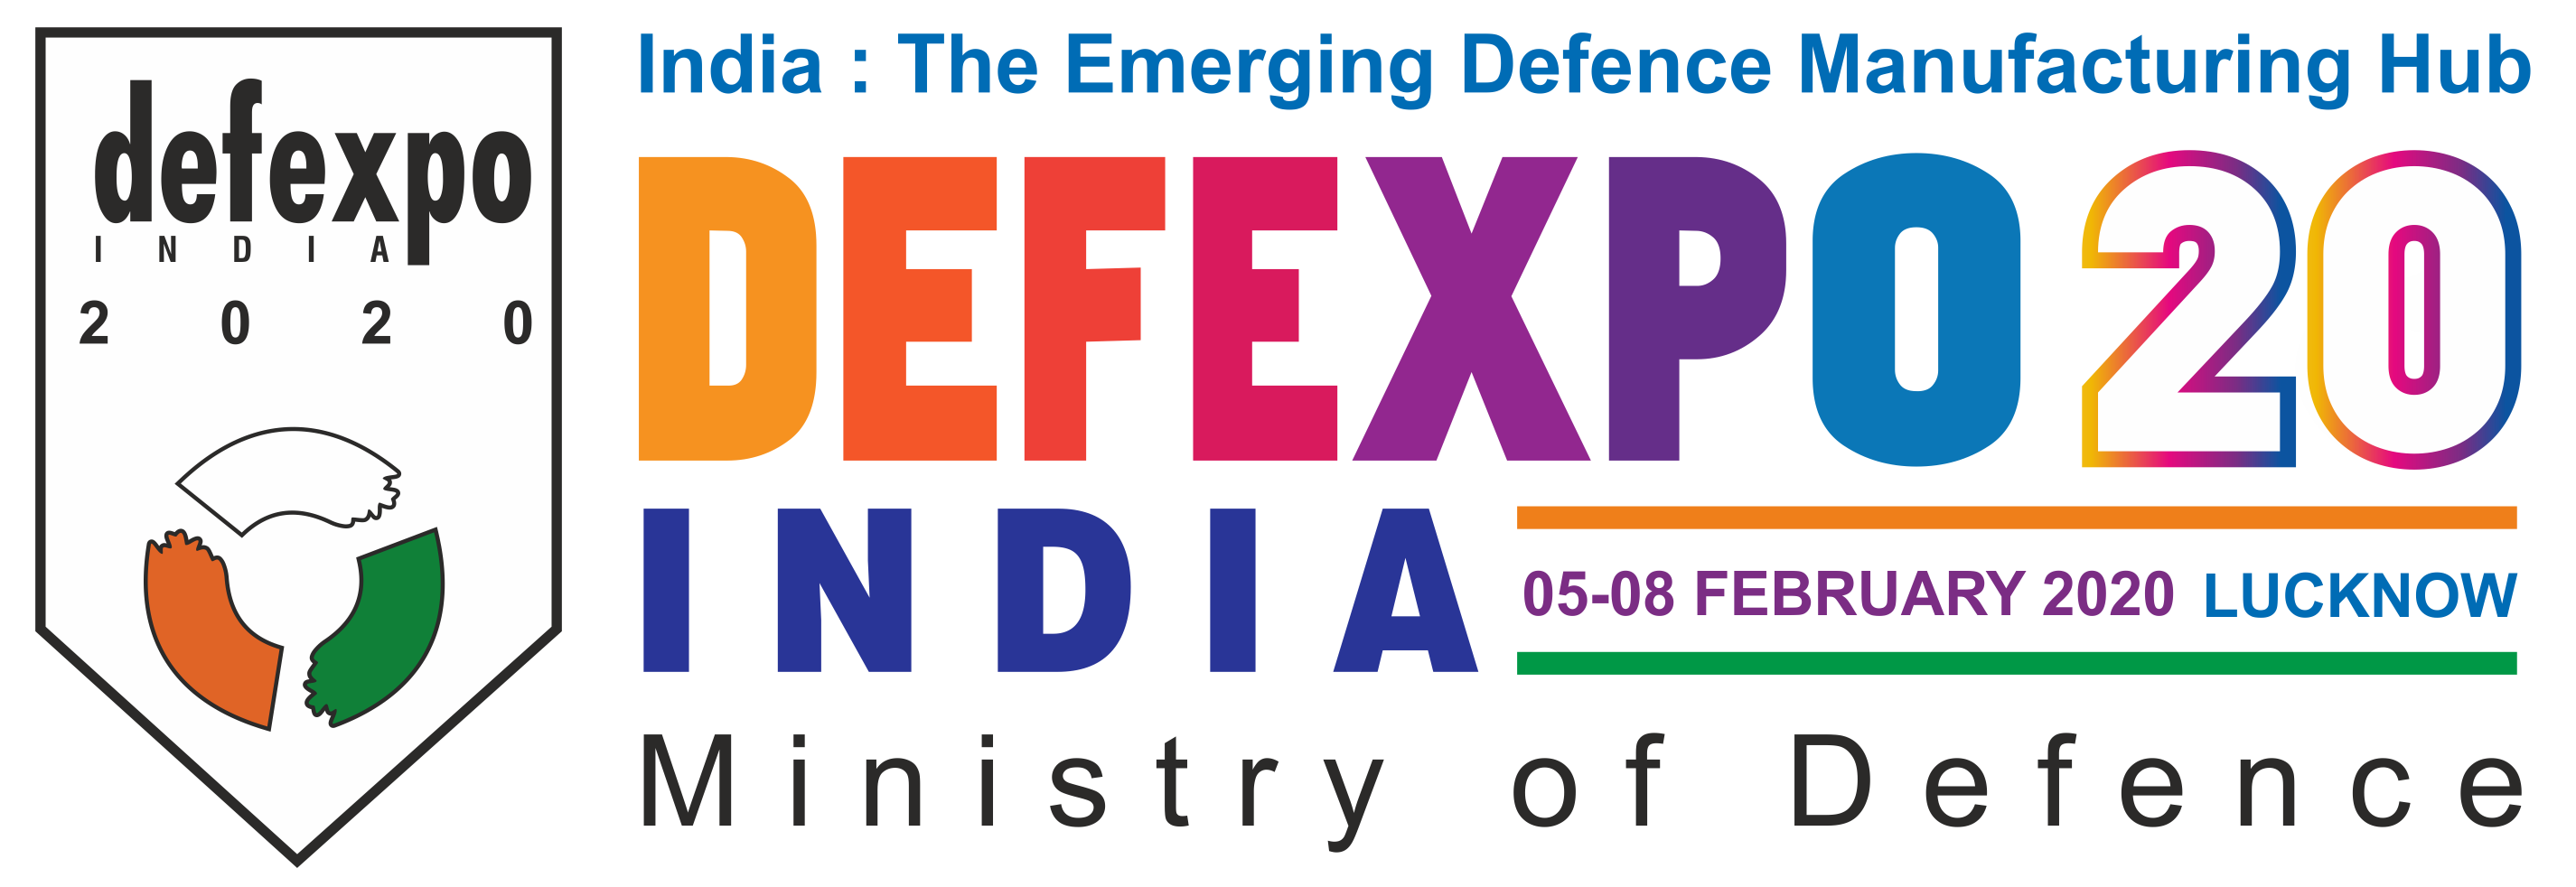 DEFENCE EXPO